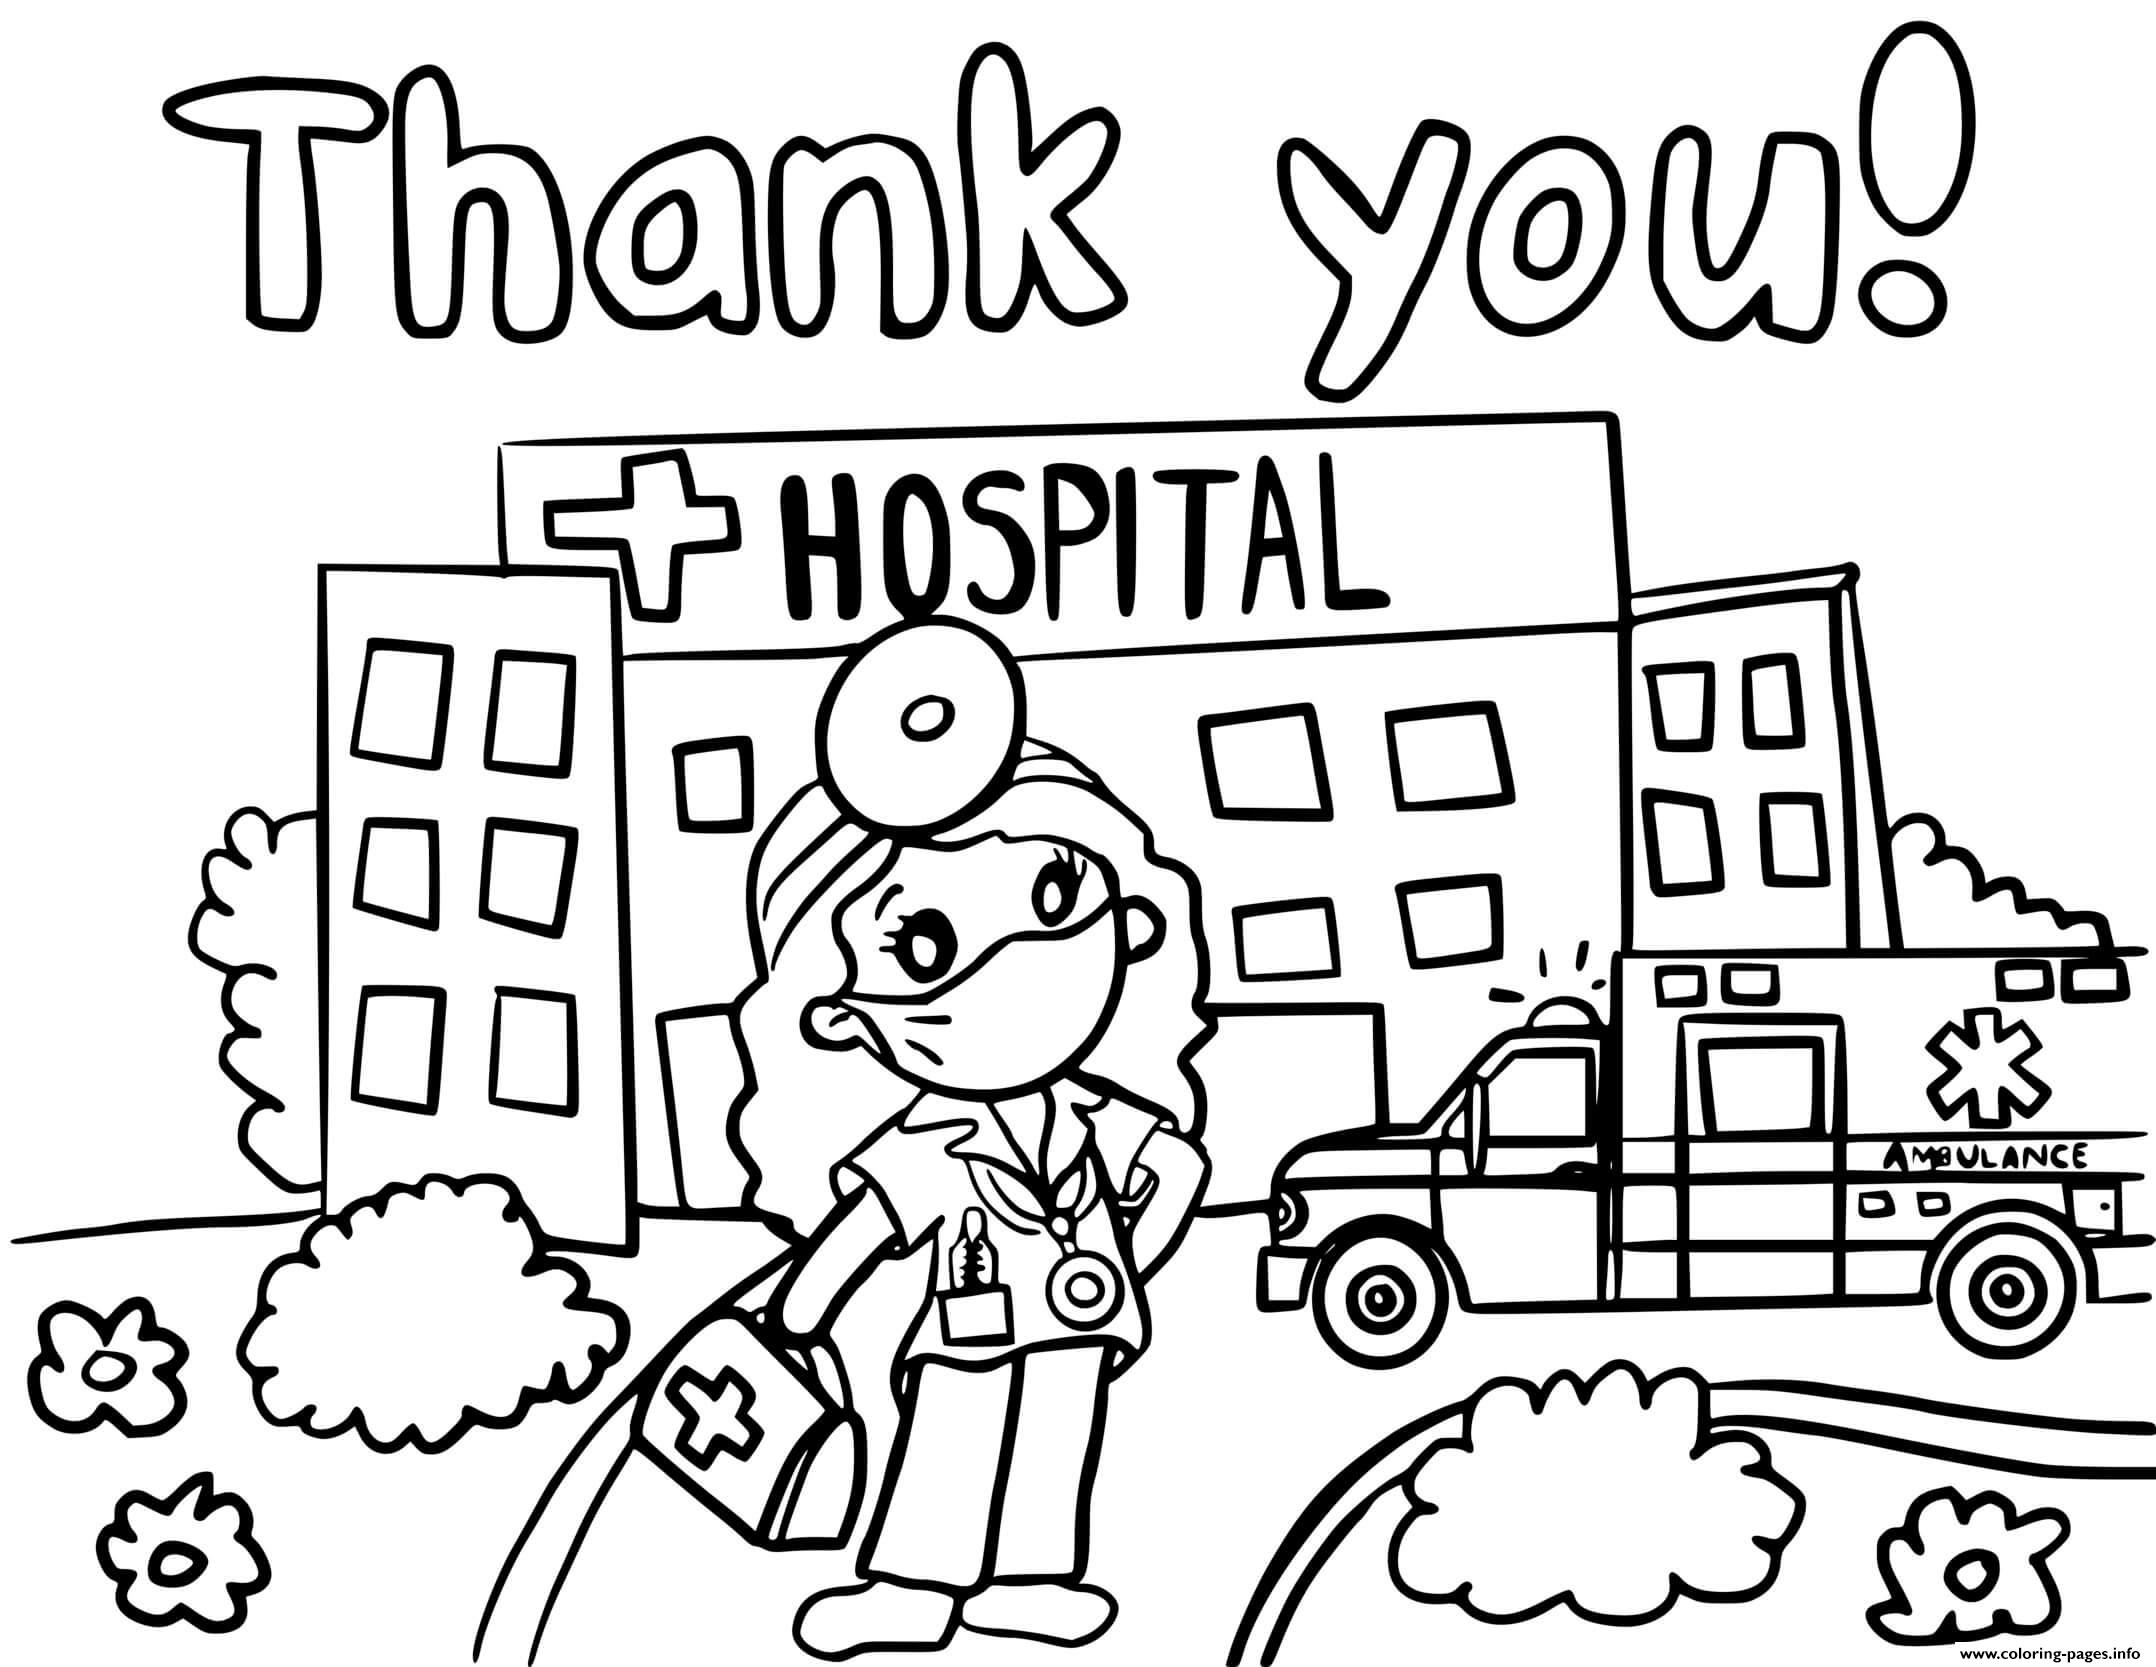 Thank You Hospital Healthcare Workers coloring